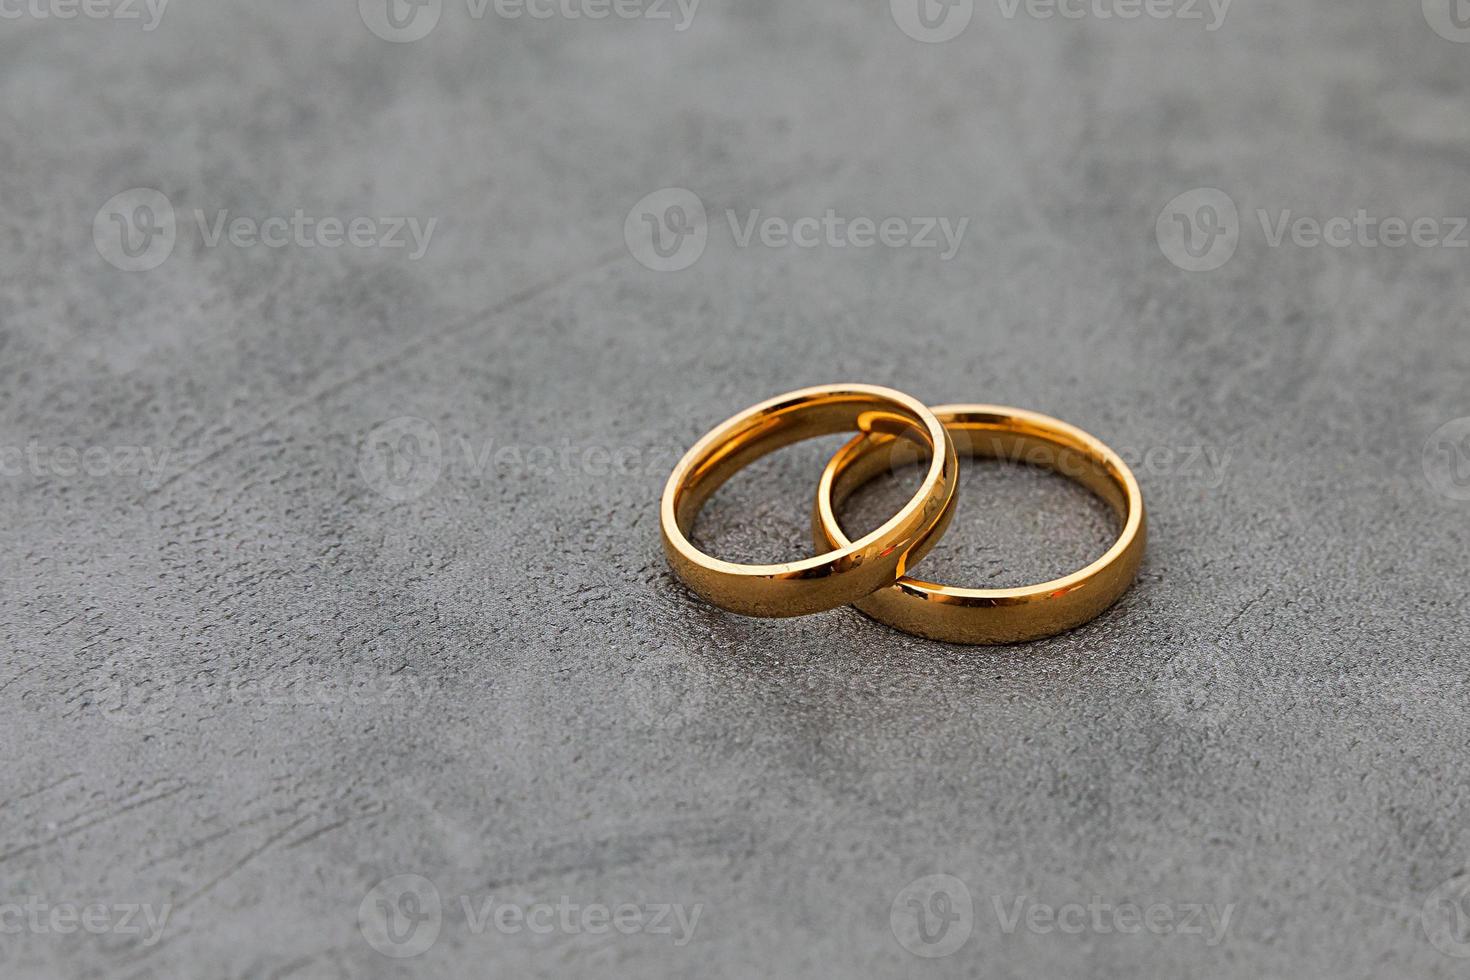 Will you marry me. Two golden wedding rings on concrete stone grey background. Engagement marriage proposal wedding concept. Banner on wedding day with copy space. Wedding day details. photo